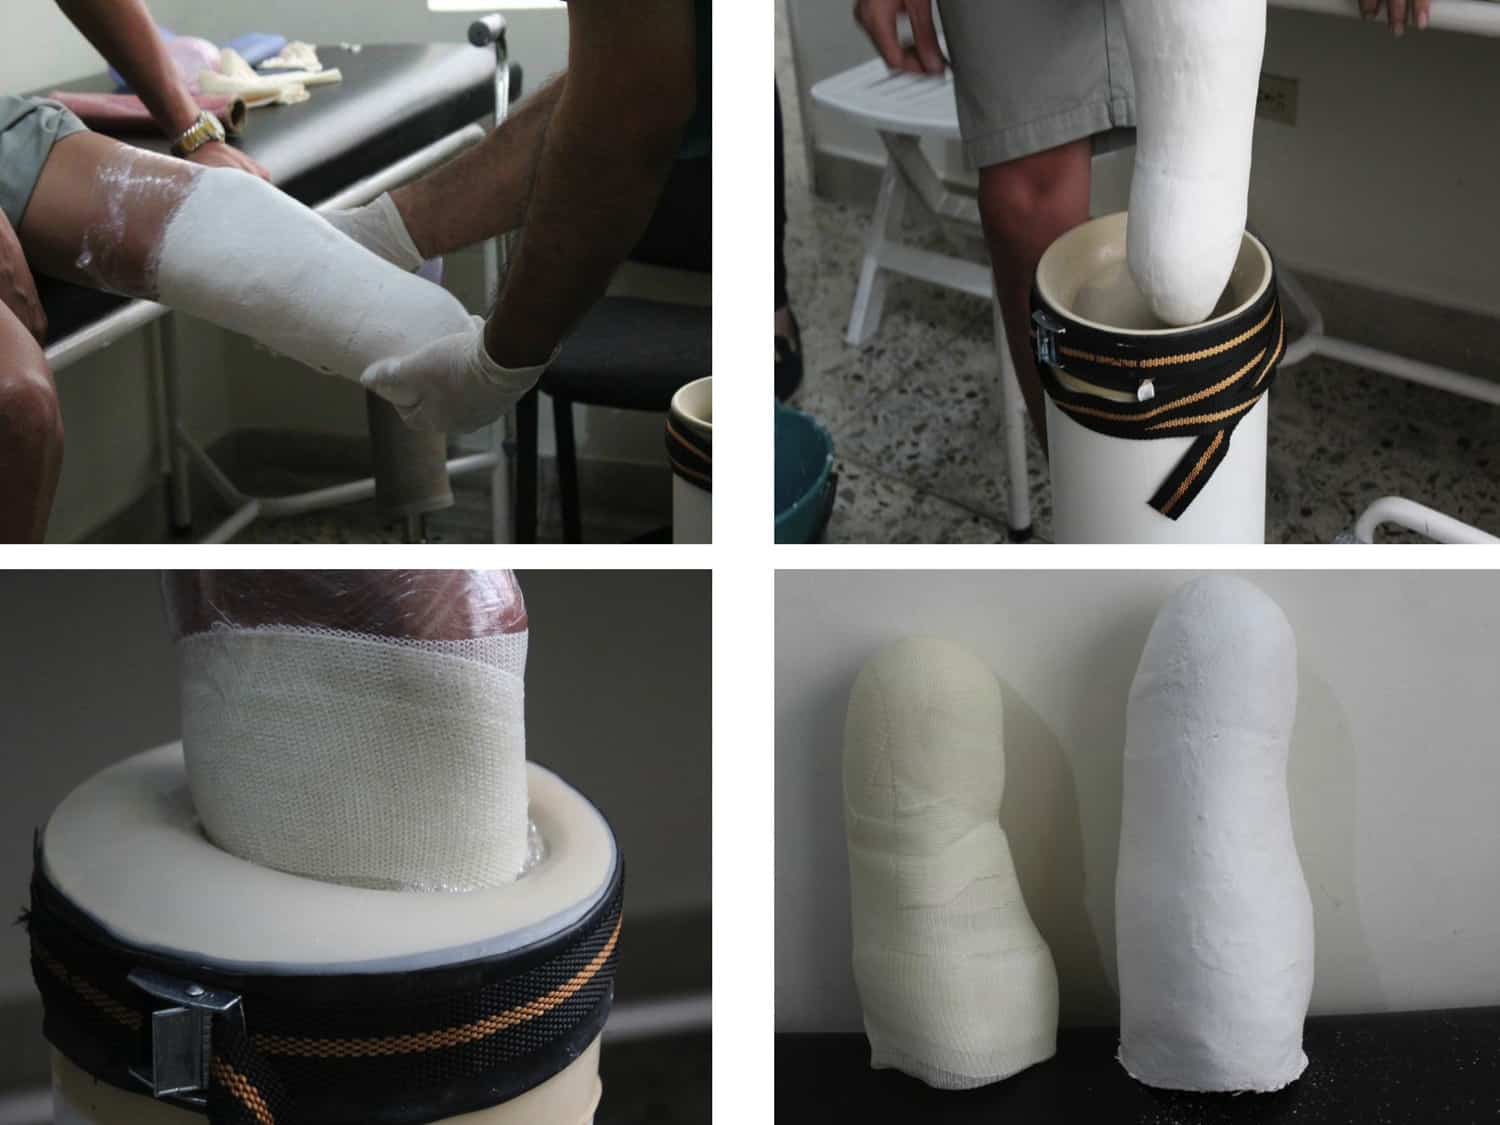 Majicast captures the unique shape of lower residual limbs with the use of plaster bandages or other direct casting material